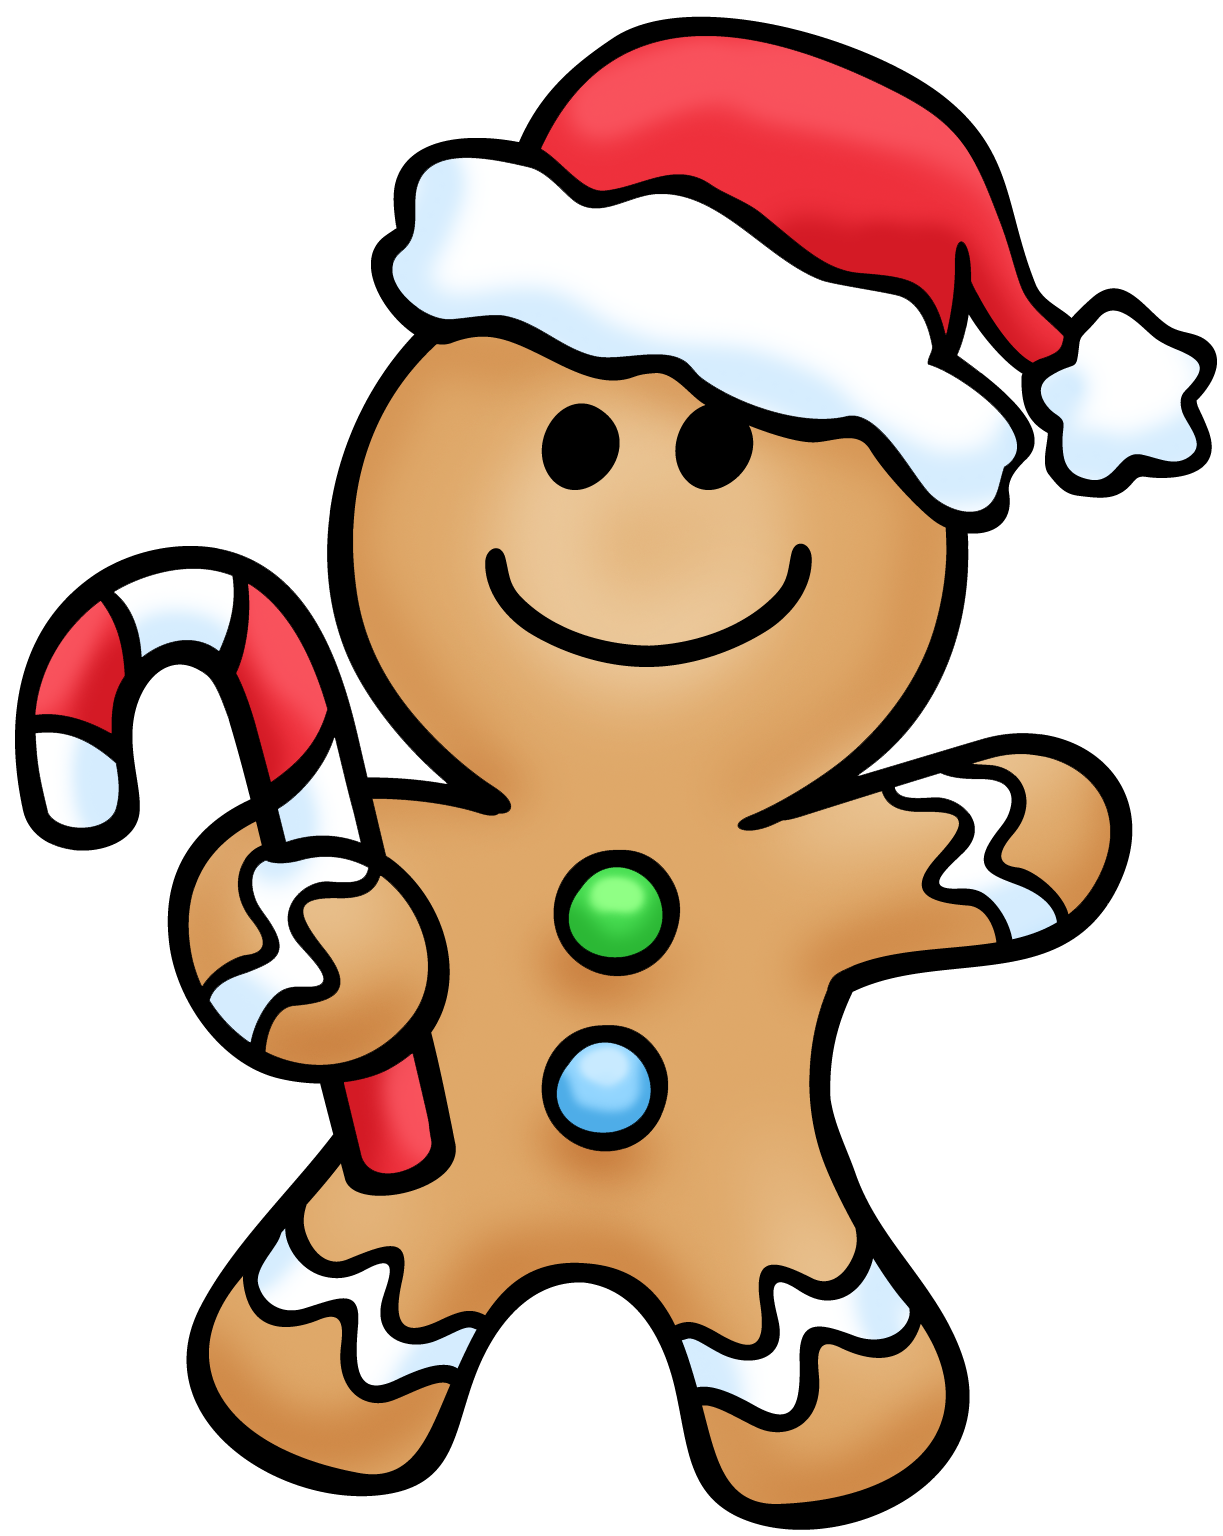 free gingerbread man clipart - photo #21